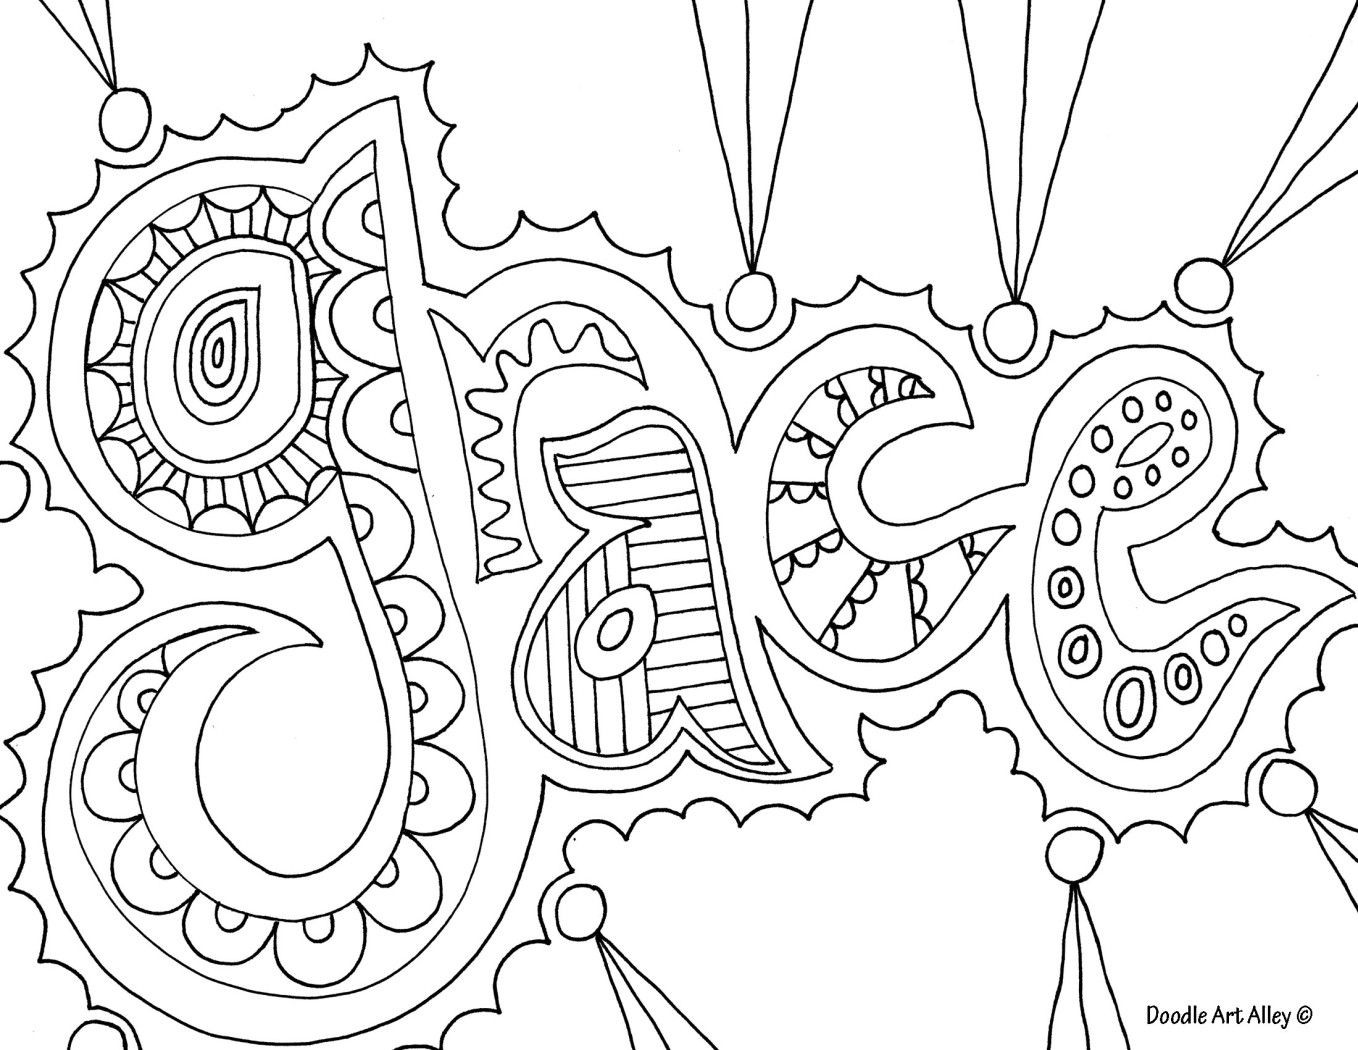 Best ideas about Pink Out Coloring Pages For Teens
. Save or Pin Doodle art grace nice coloring page for older kids Now.